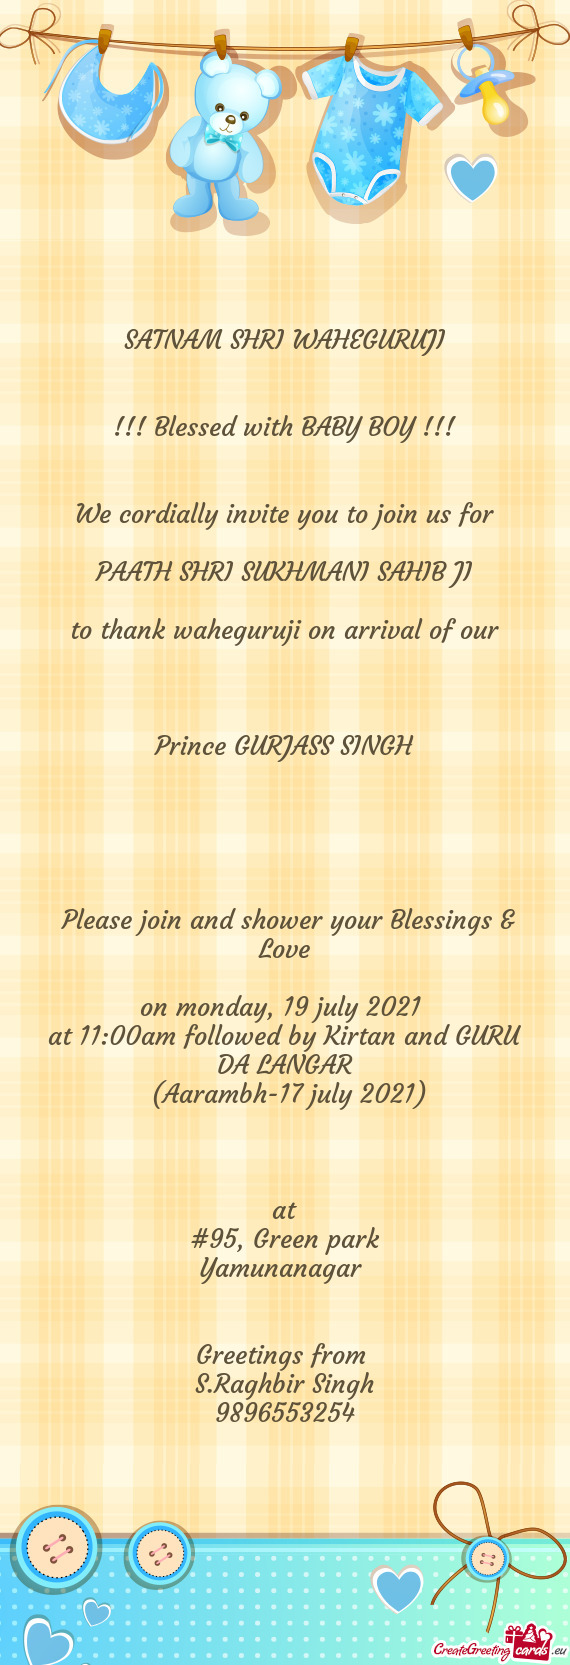 Please join and shower your Blessings & Love